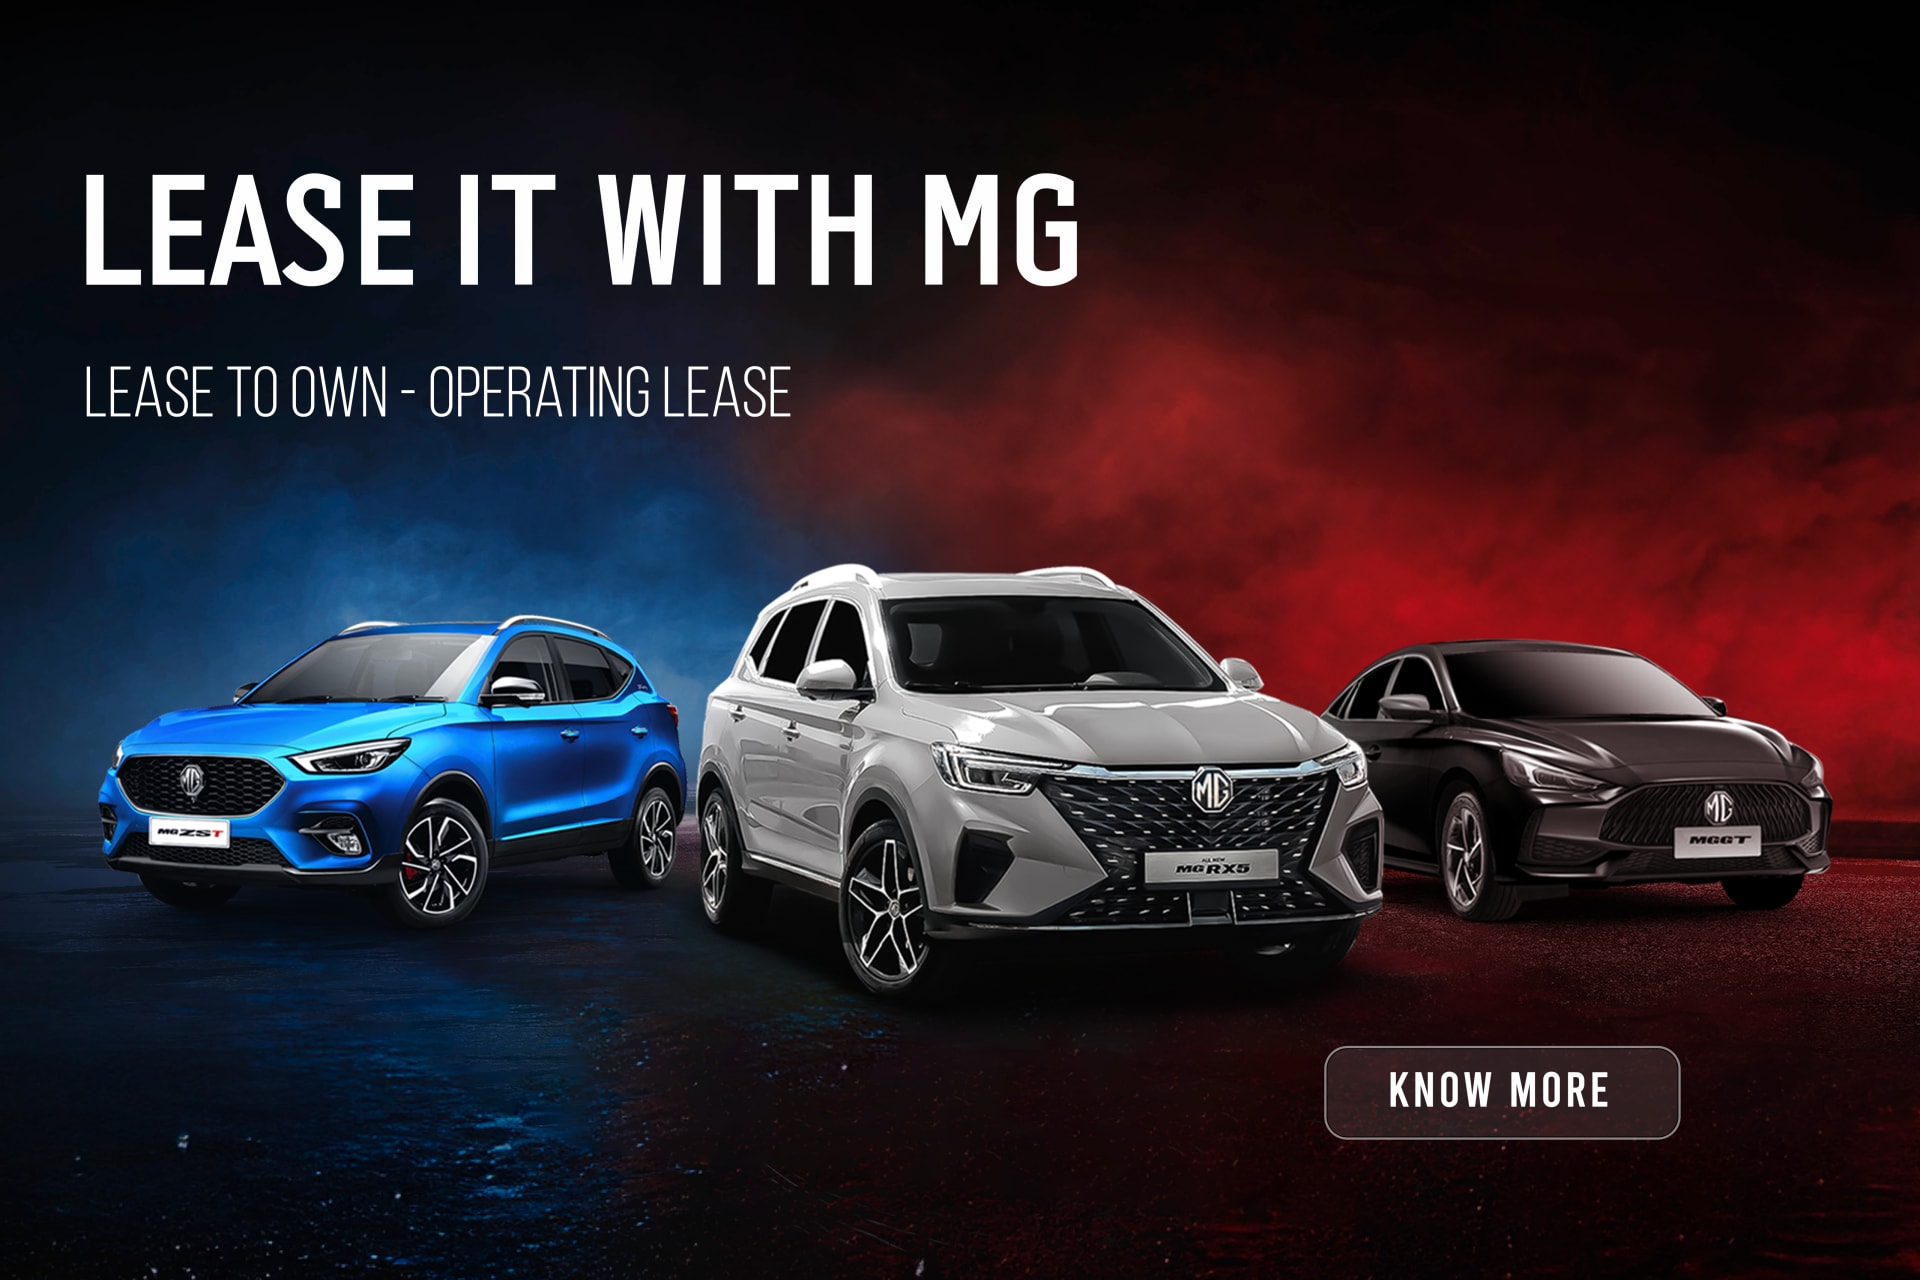 Leasing Offer With MG